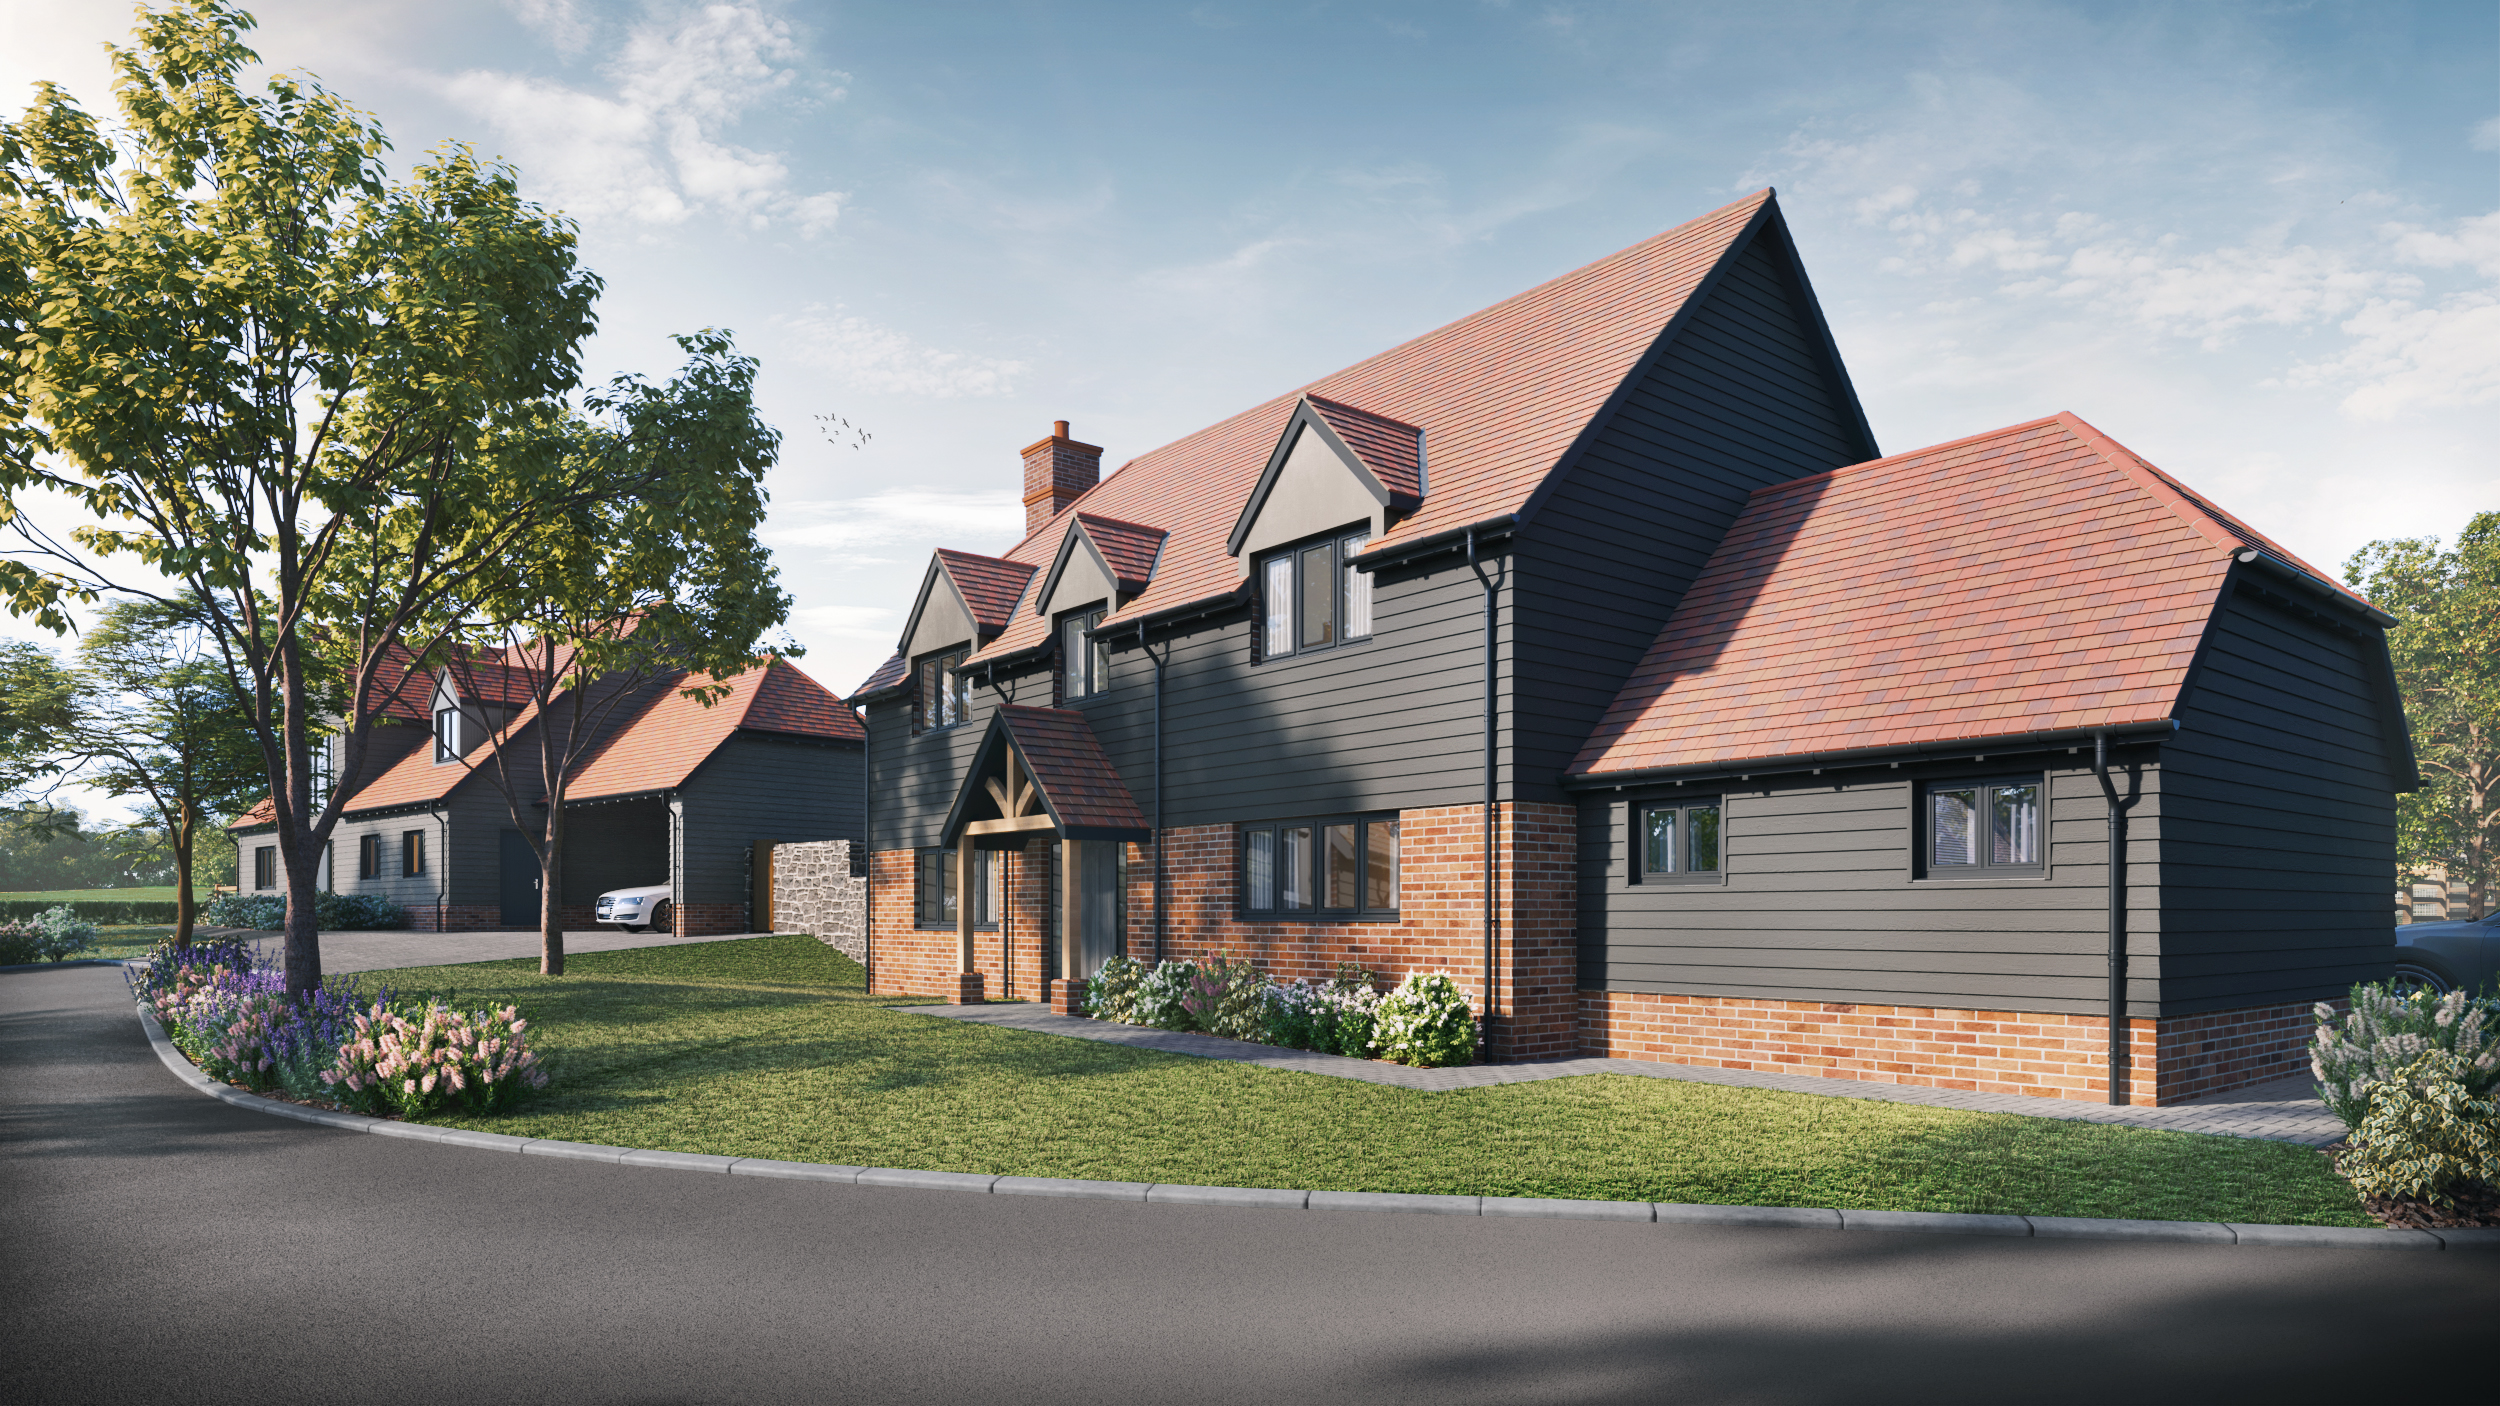 CGI of two detached houses with red roof tiles and grey cladding